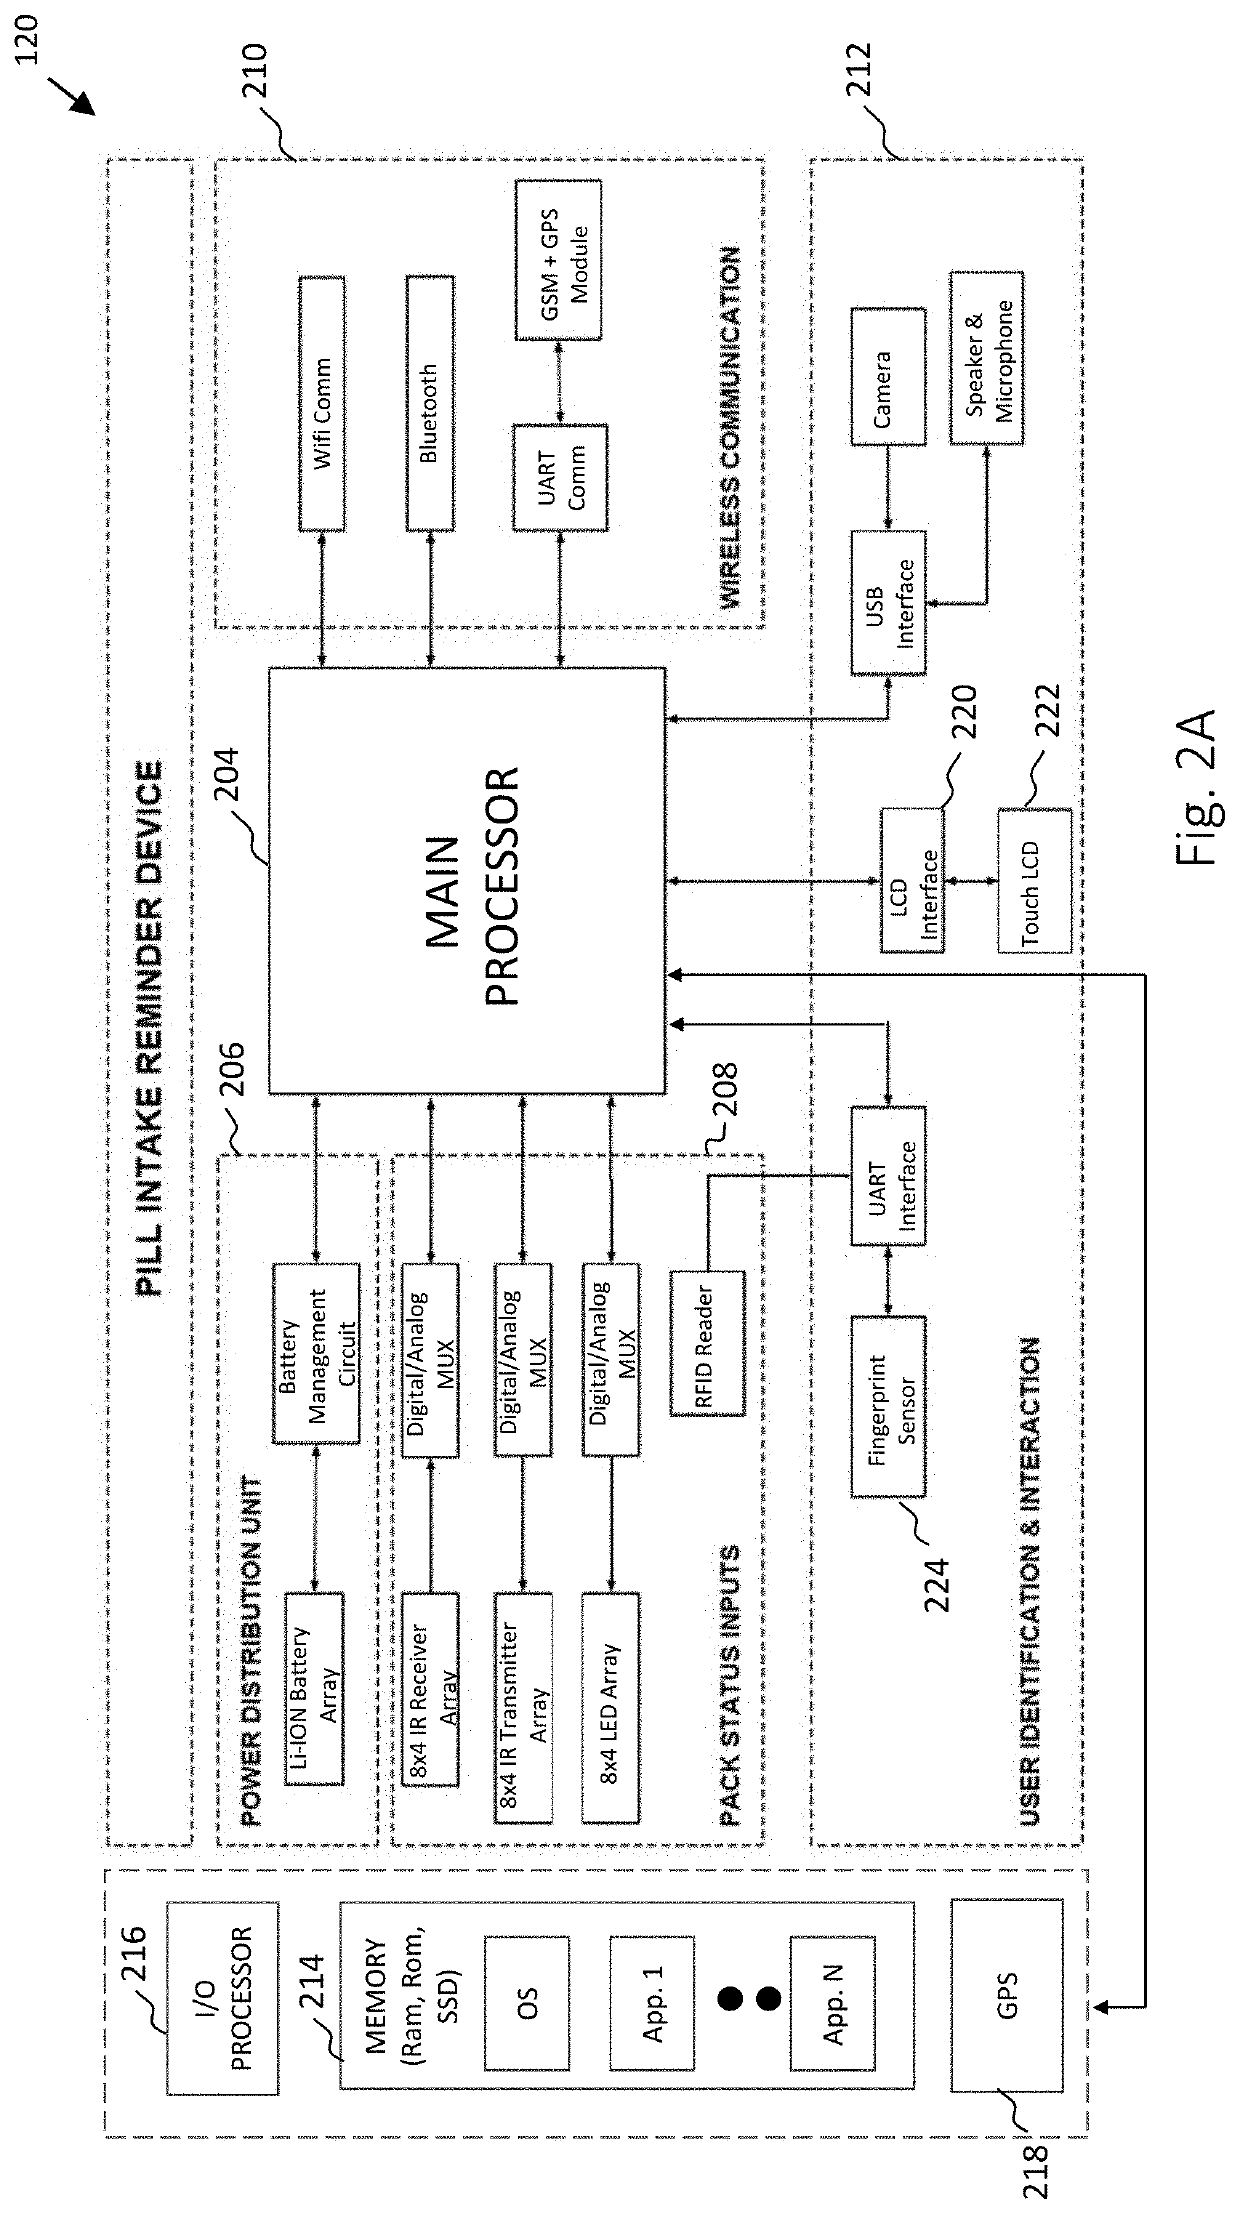 System and method for storing medication and alerting users and caregivers for timely intake